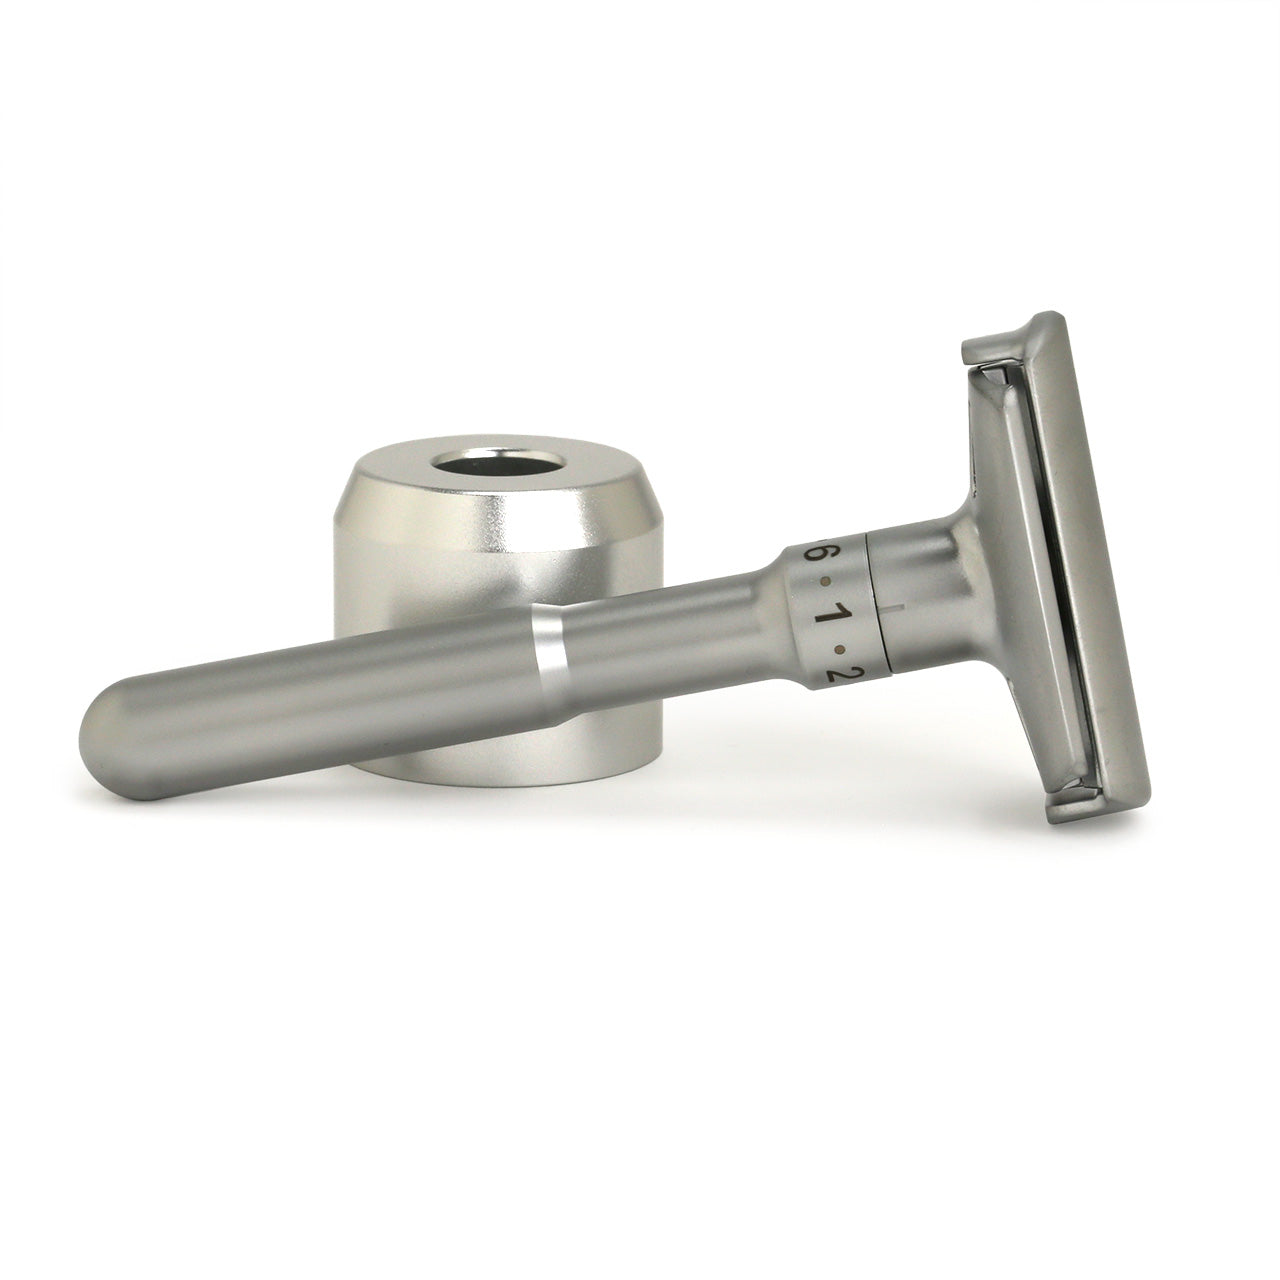 Adjustable Safety Razor stabding in its base, finished in matt chrome 